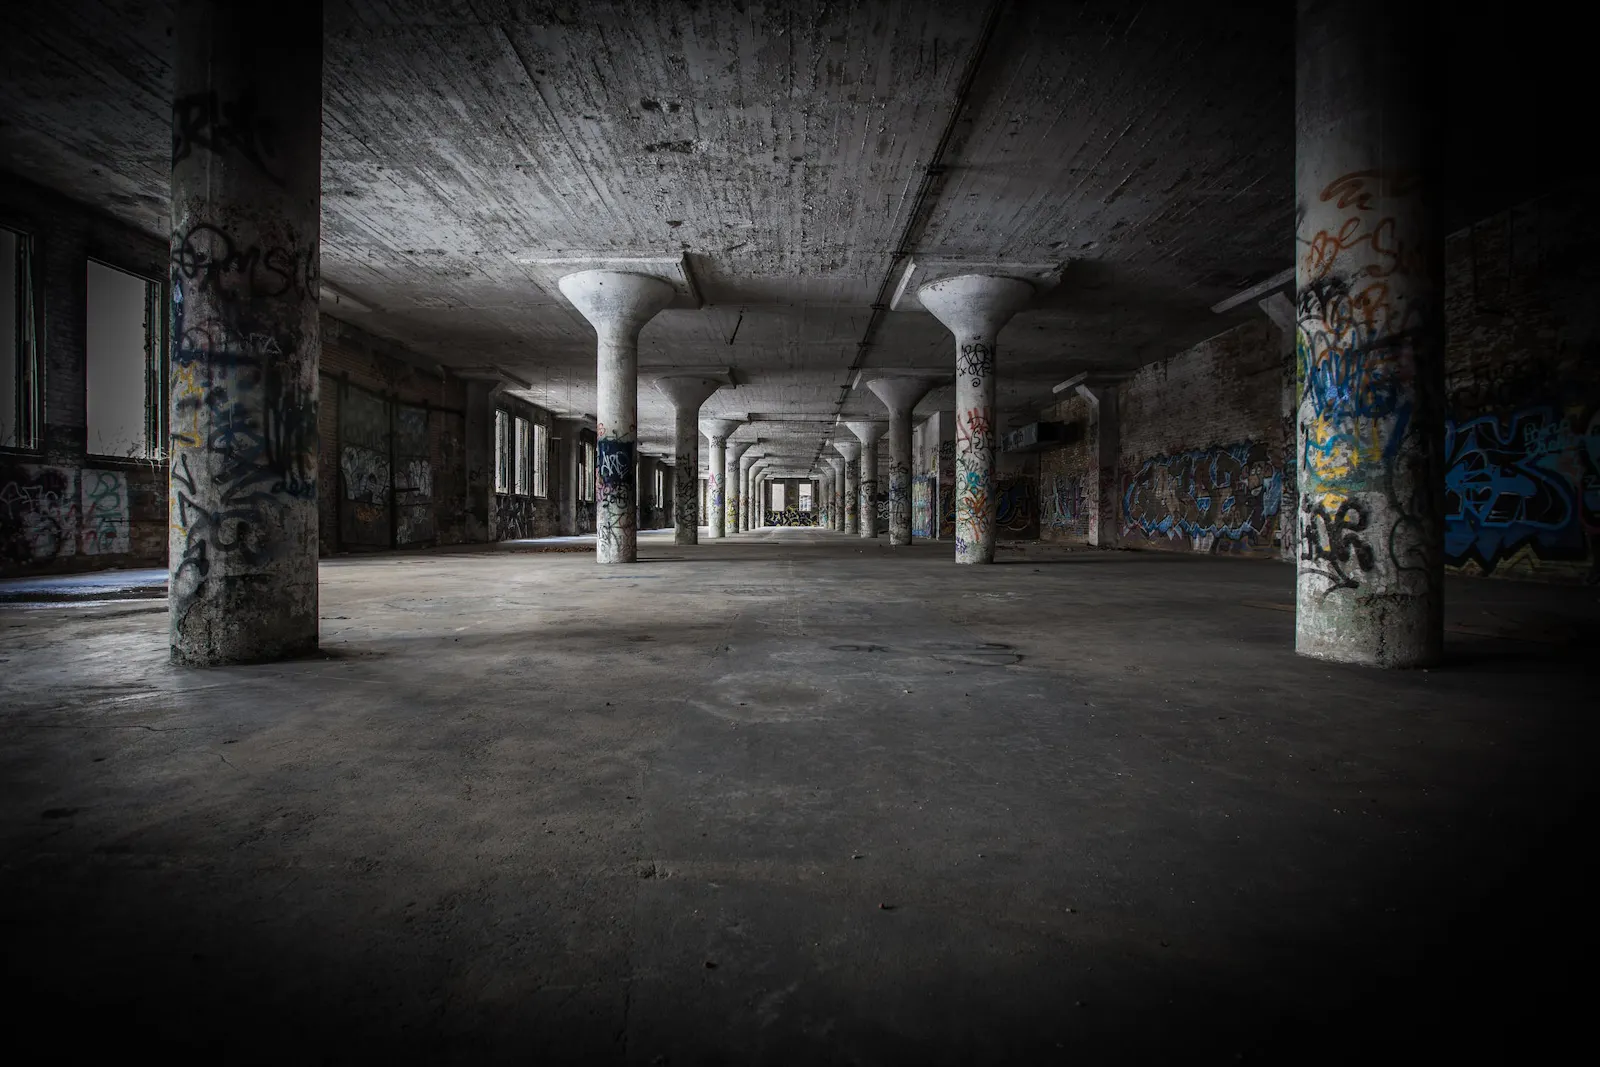 Interior black and white photo of an empty, abandoned warehouse with walls and columns covered with graffiti.